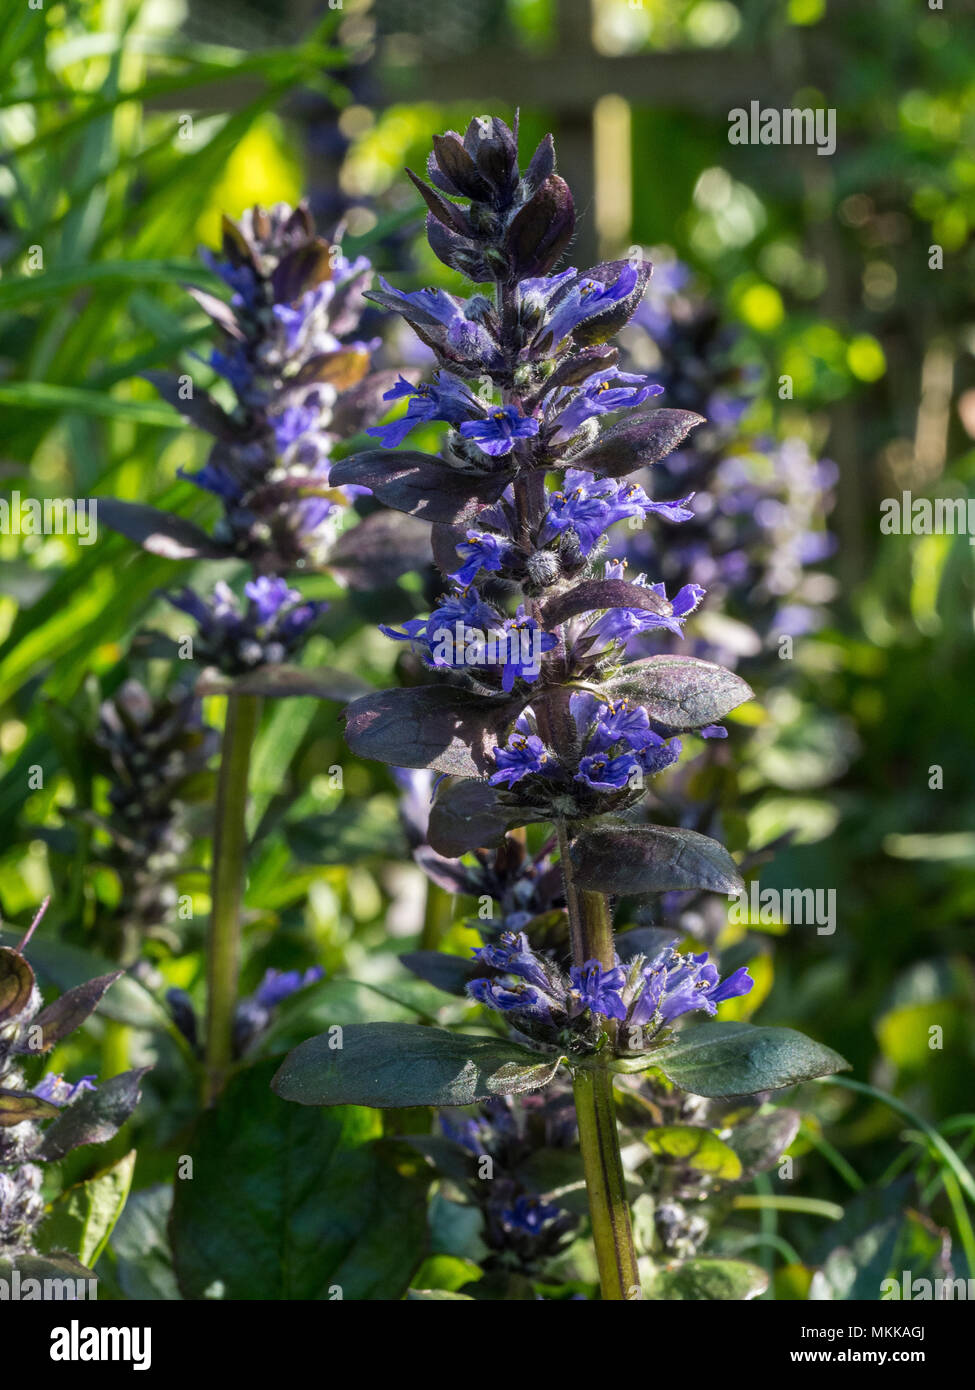 A single flower spike of Ajuga reptans Catlins Giant with other spikes in the background Stock Photo